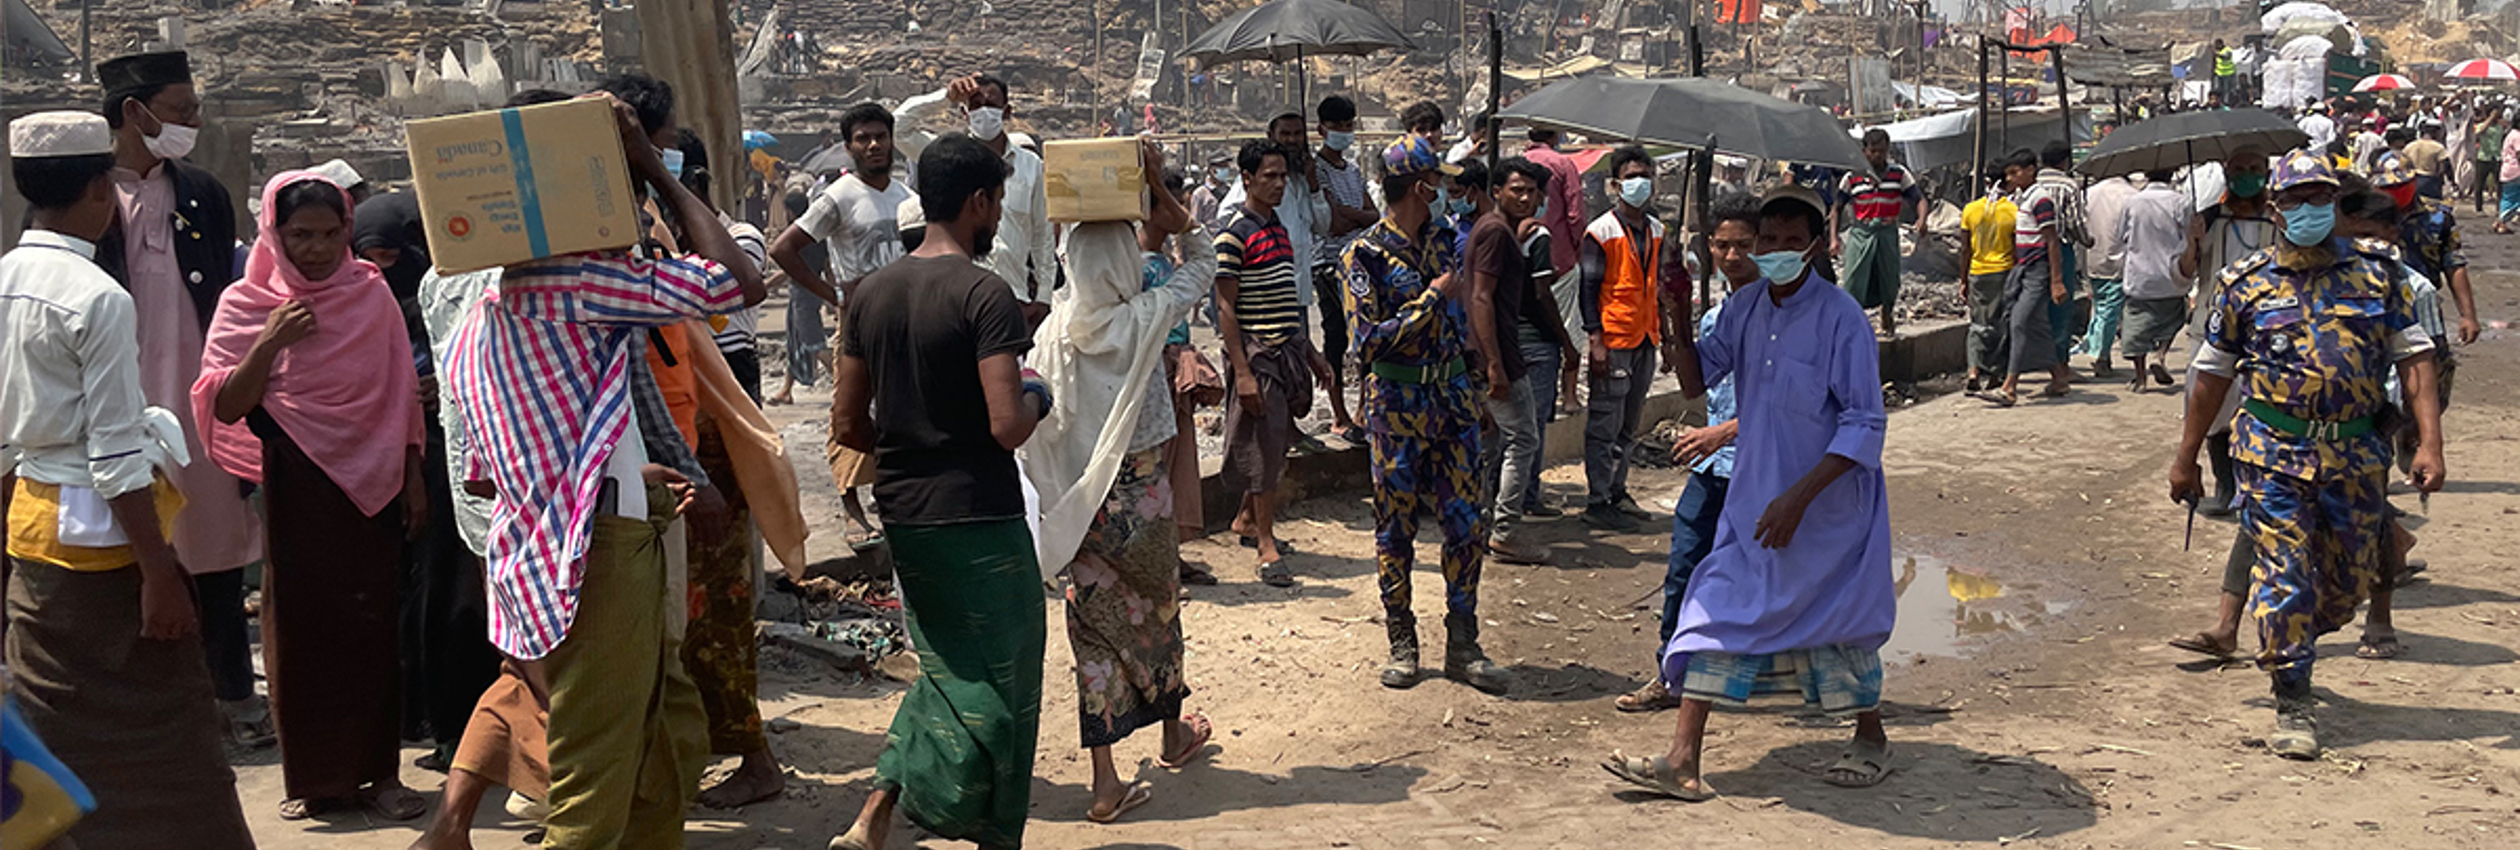 The massive fire that swept through the Kutupalong Balukali refugee camp in Cox’s Bazar, Bangladesh on 22 March has caused loss of life and immense suffering. @UNHCR/Louise Donovan